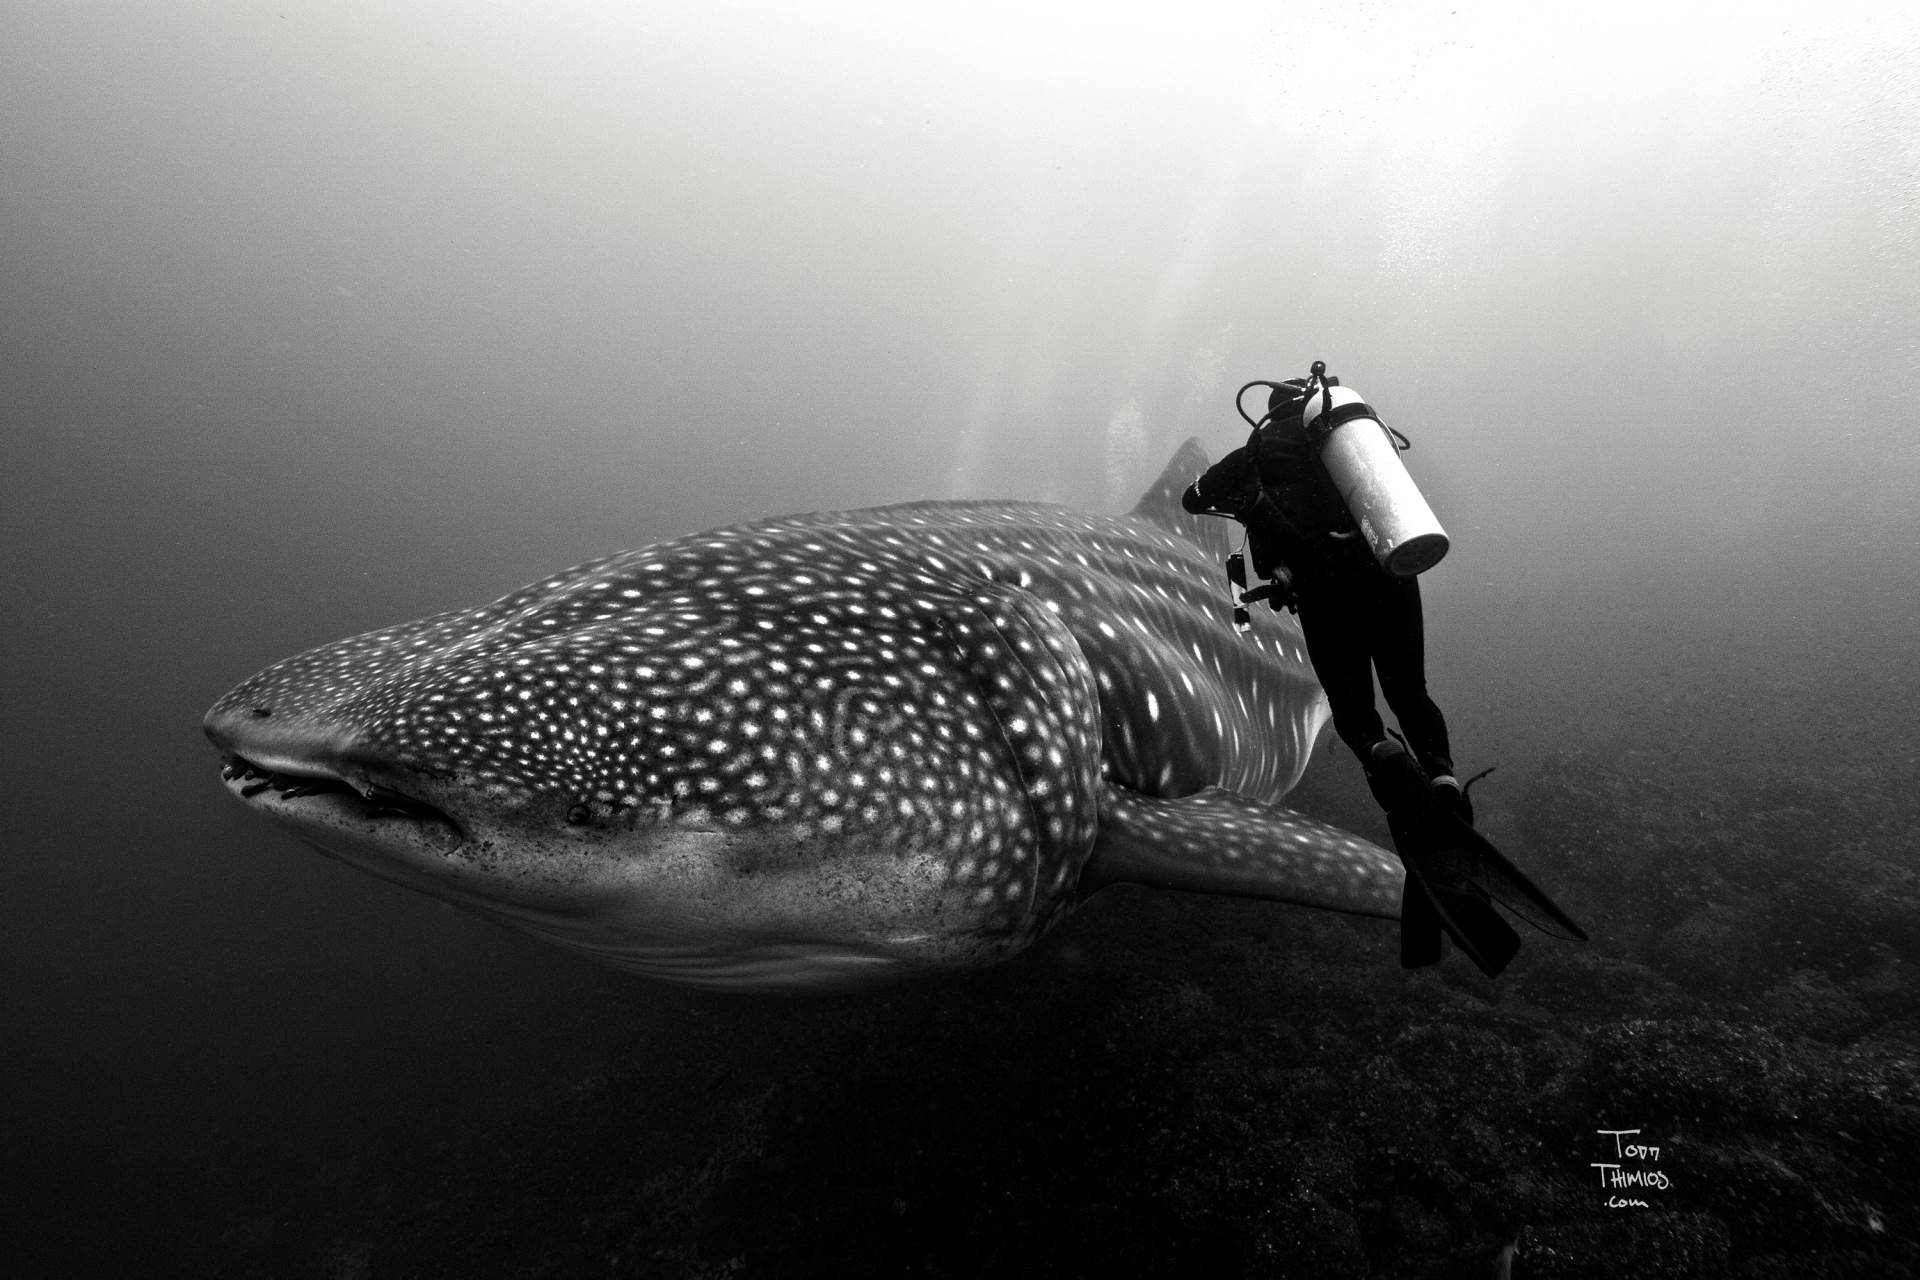 An incredible moment with the biggest whale shark I've ever seen emerge from the depths and leave us all in awe.
http://www.toddthimios.com/shopgallery/